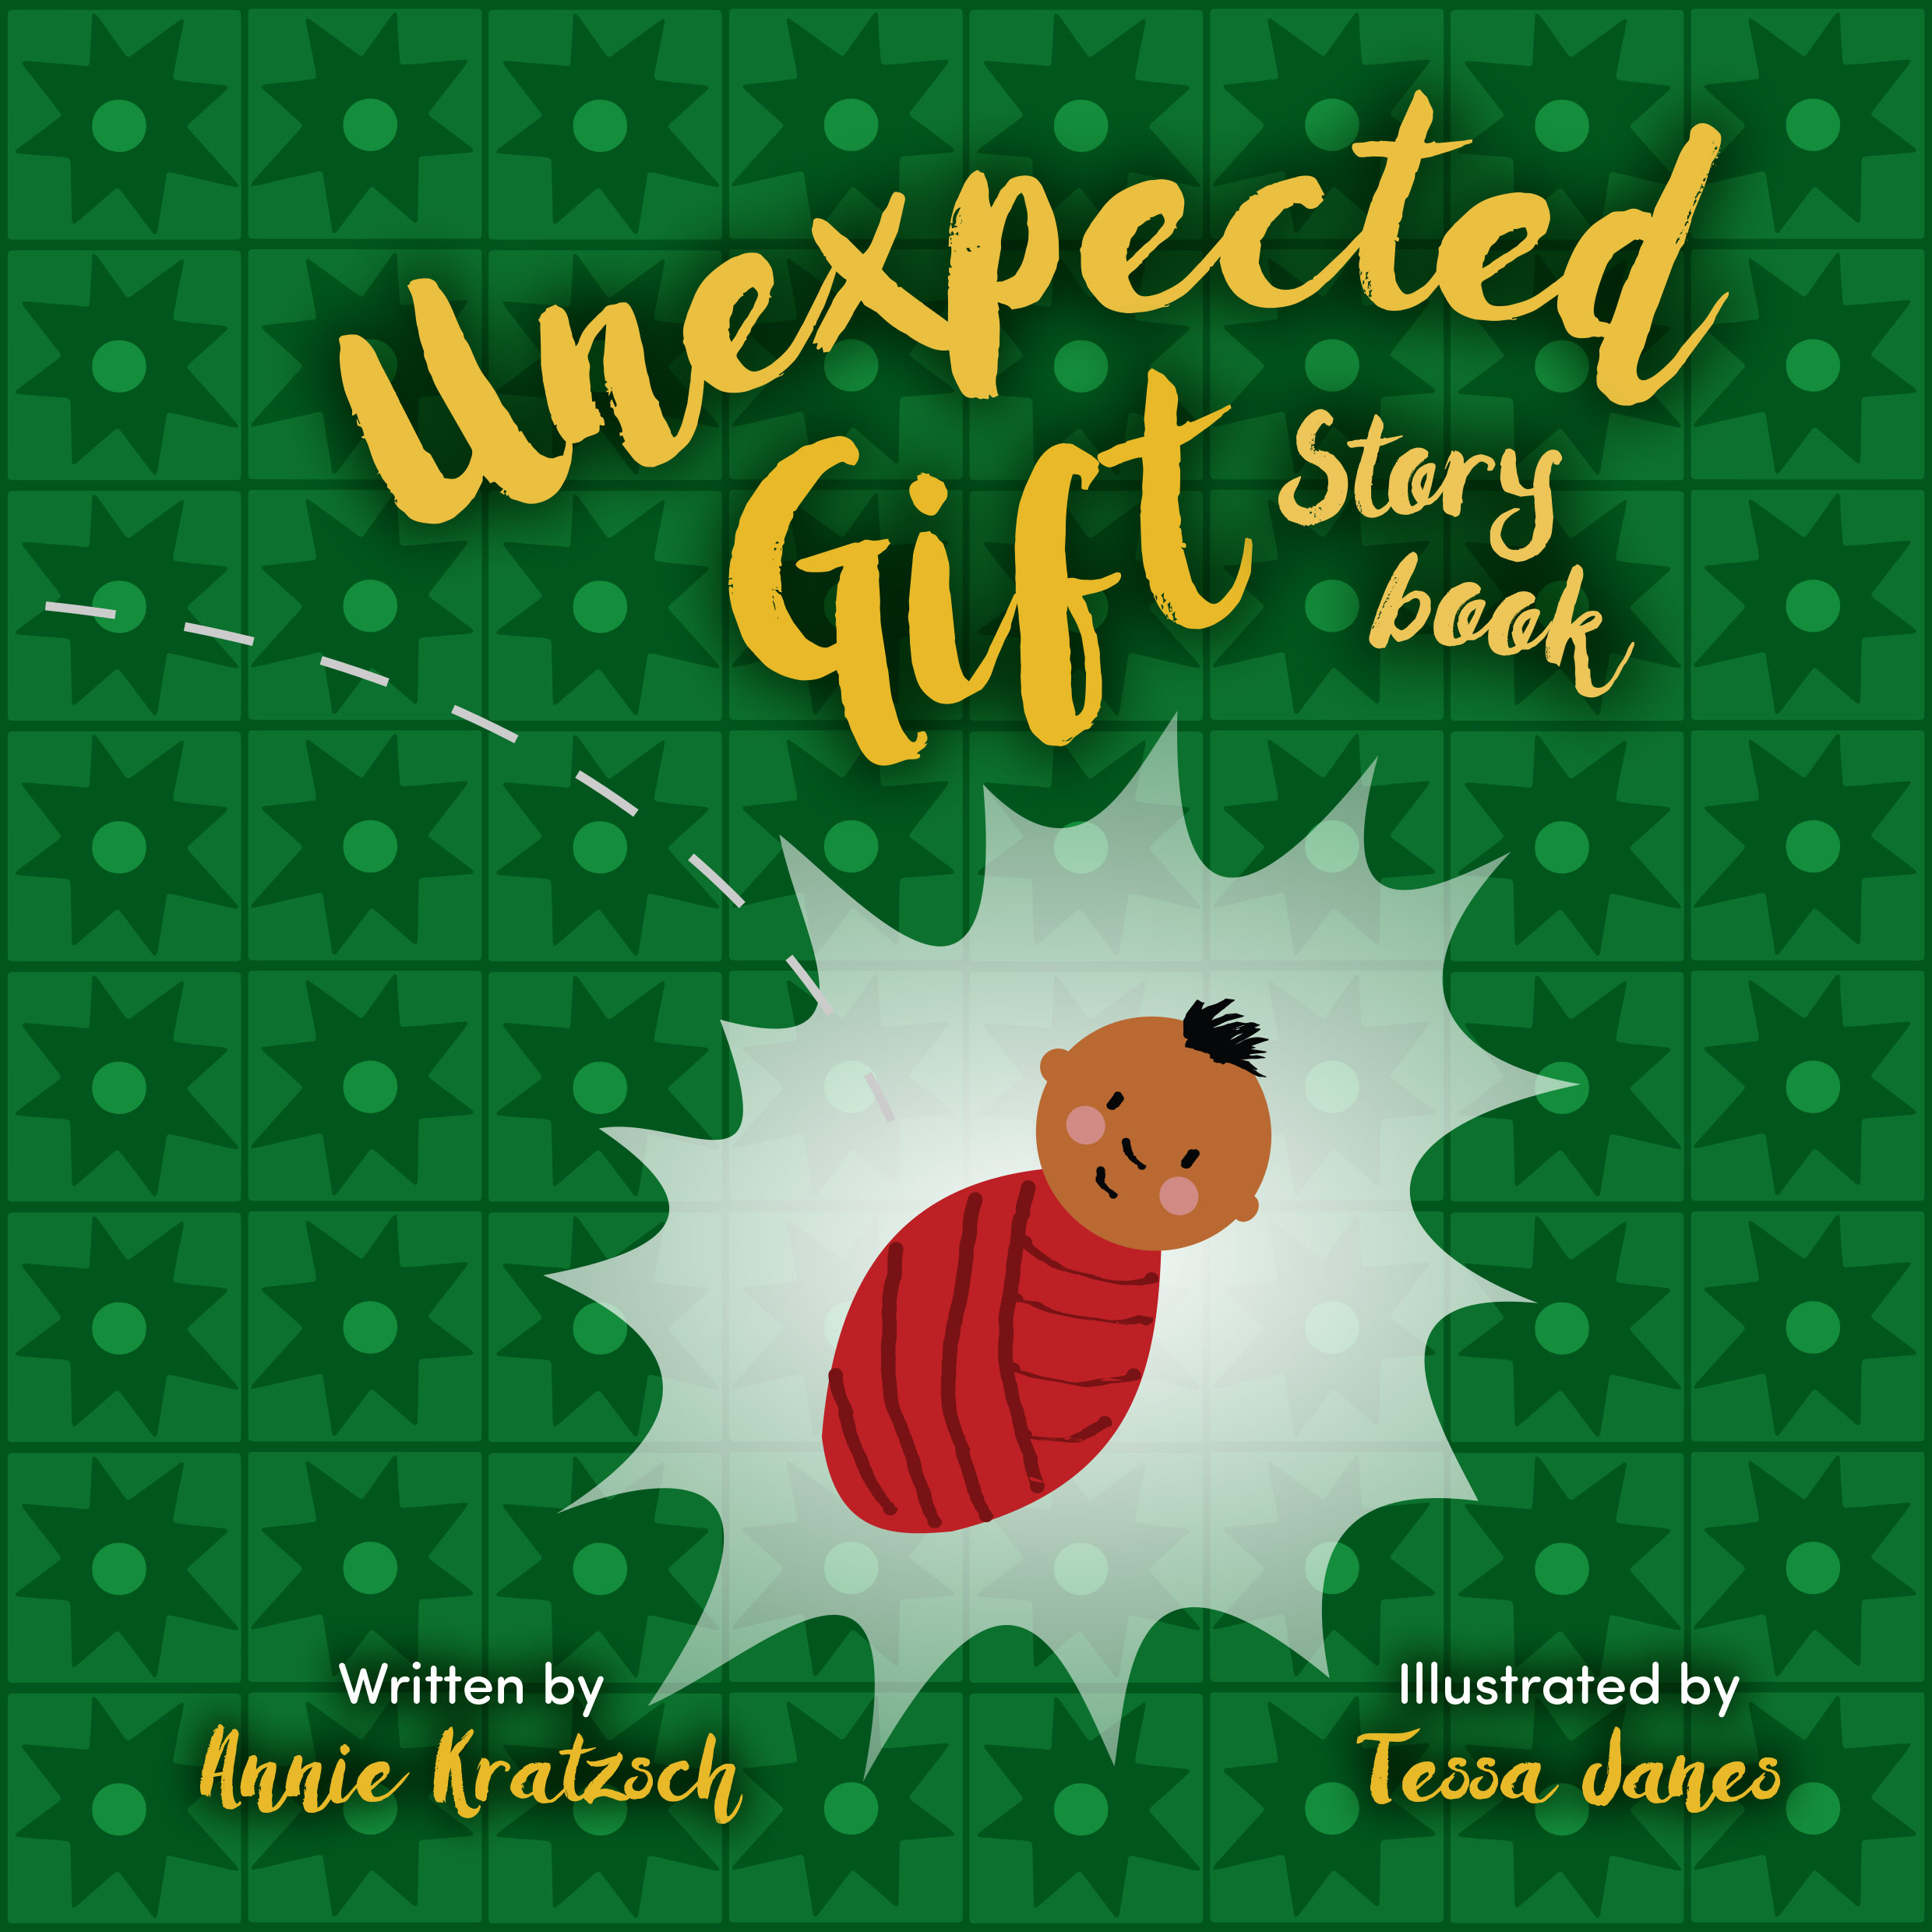 The Unexpected Gift Story Book